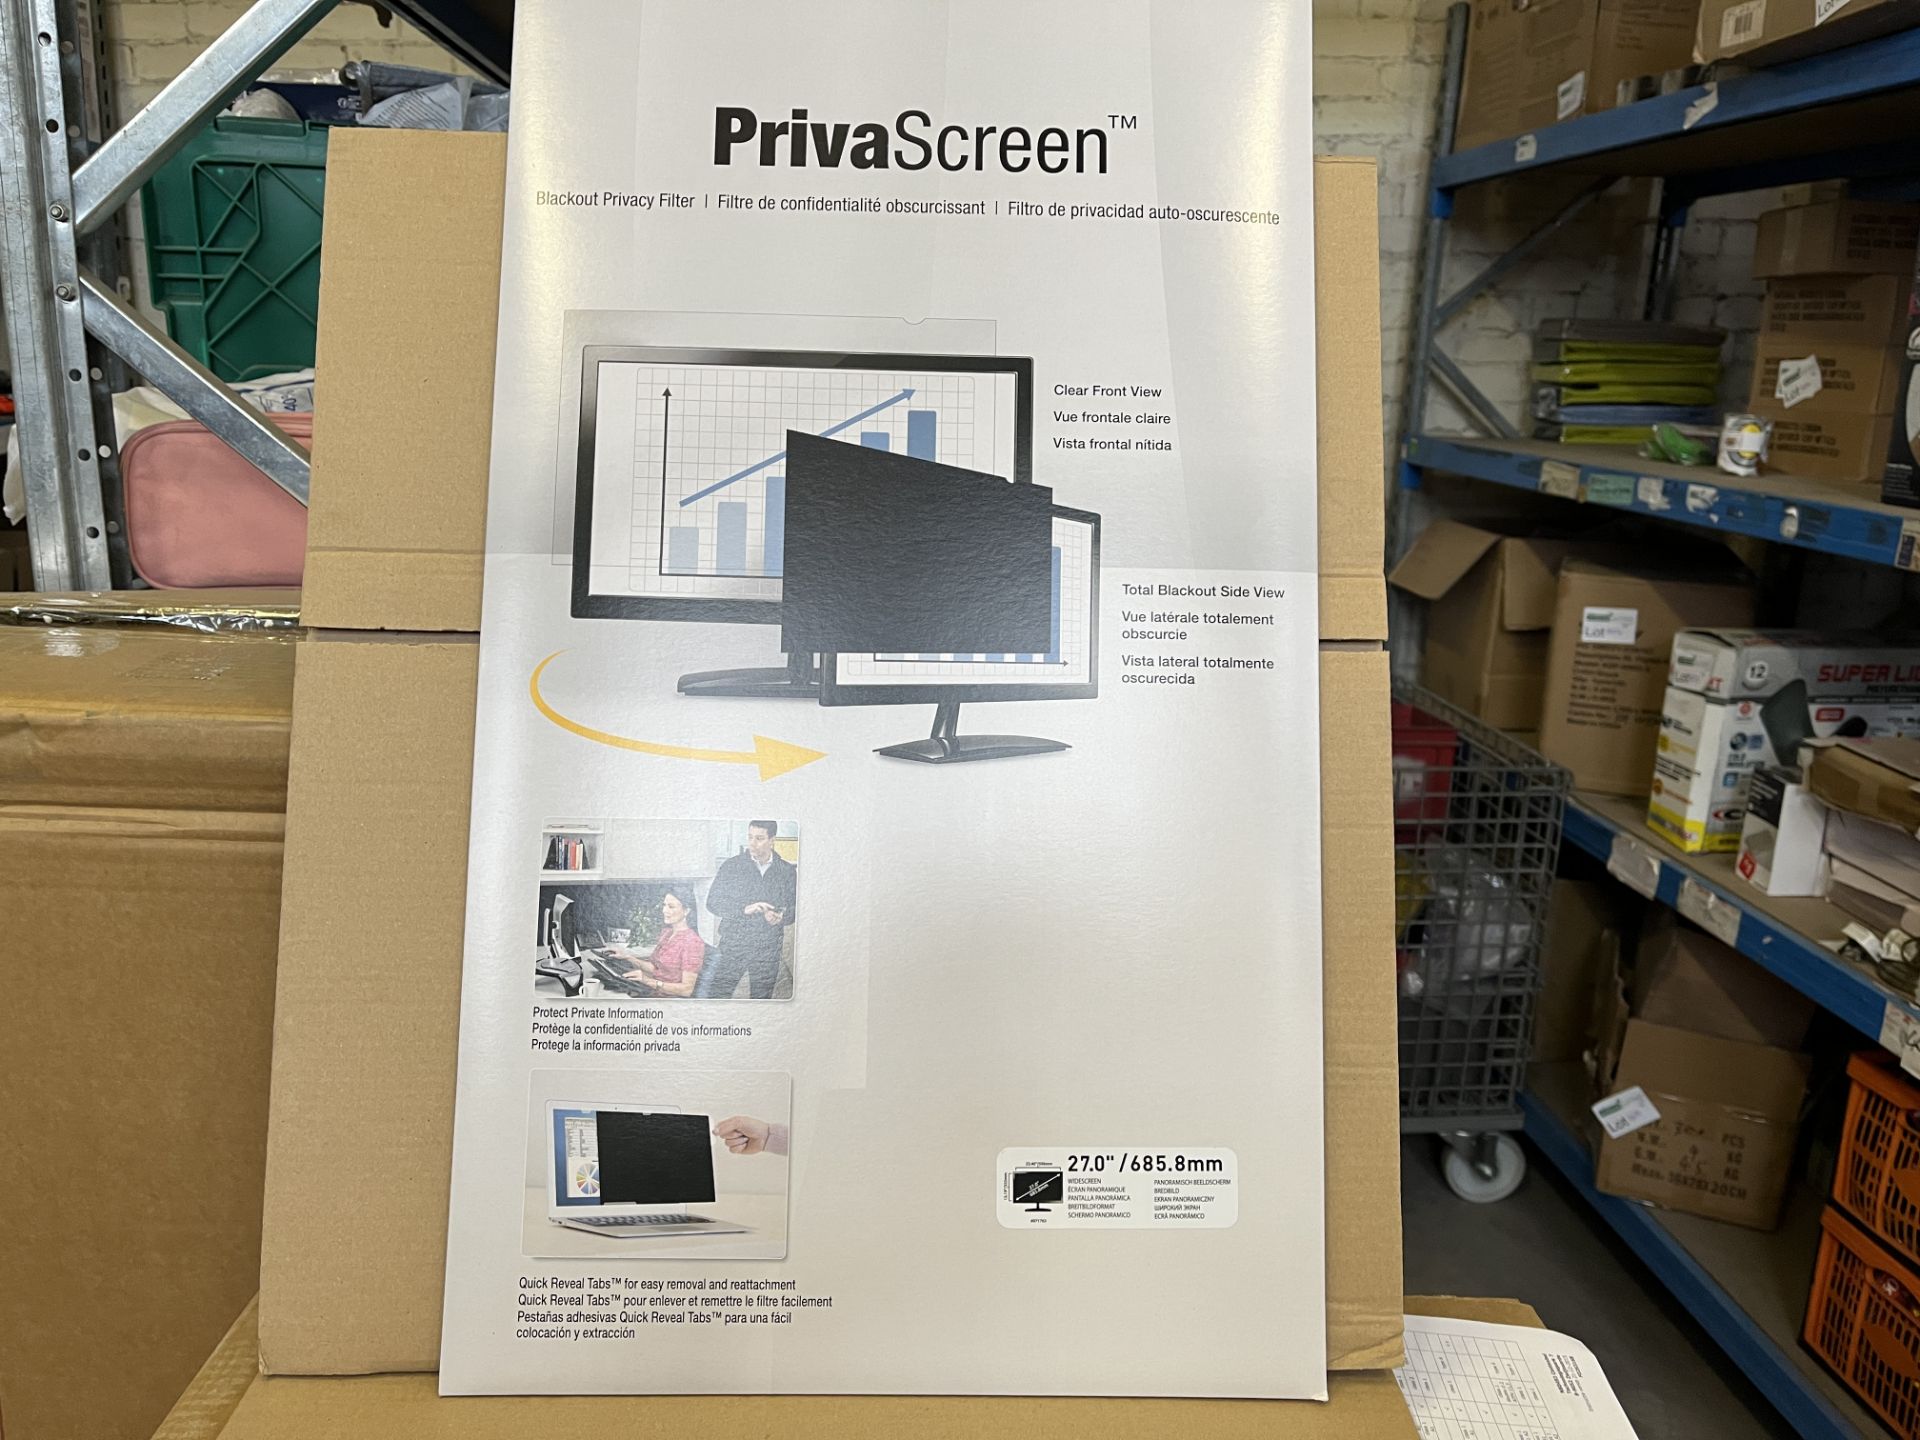 BRAND NEW FELLOWES WIDESCREEN MONITOR BLACKOUT PRIVACY FILTER 16:9 27 INCH RRP £220